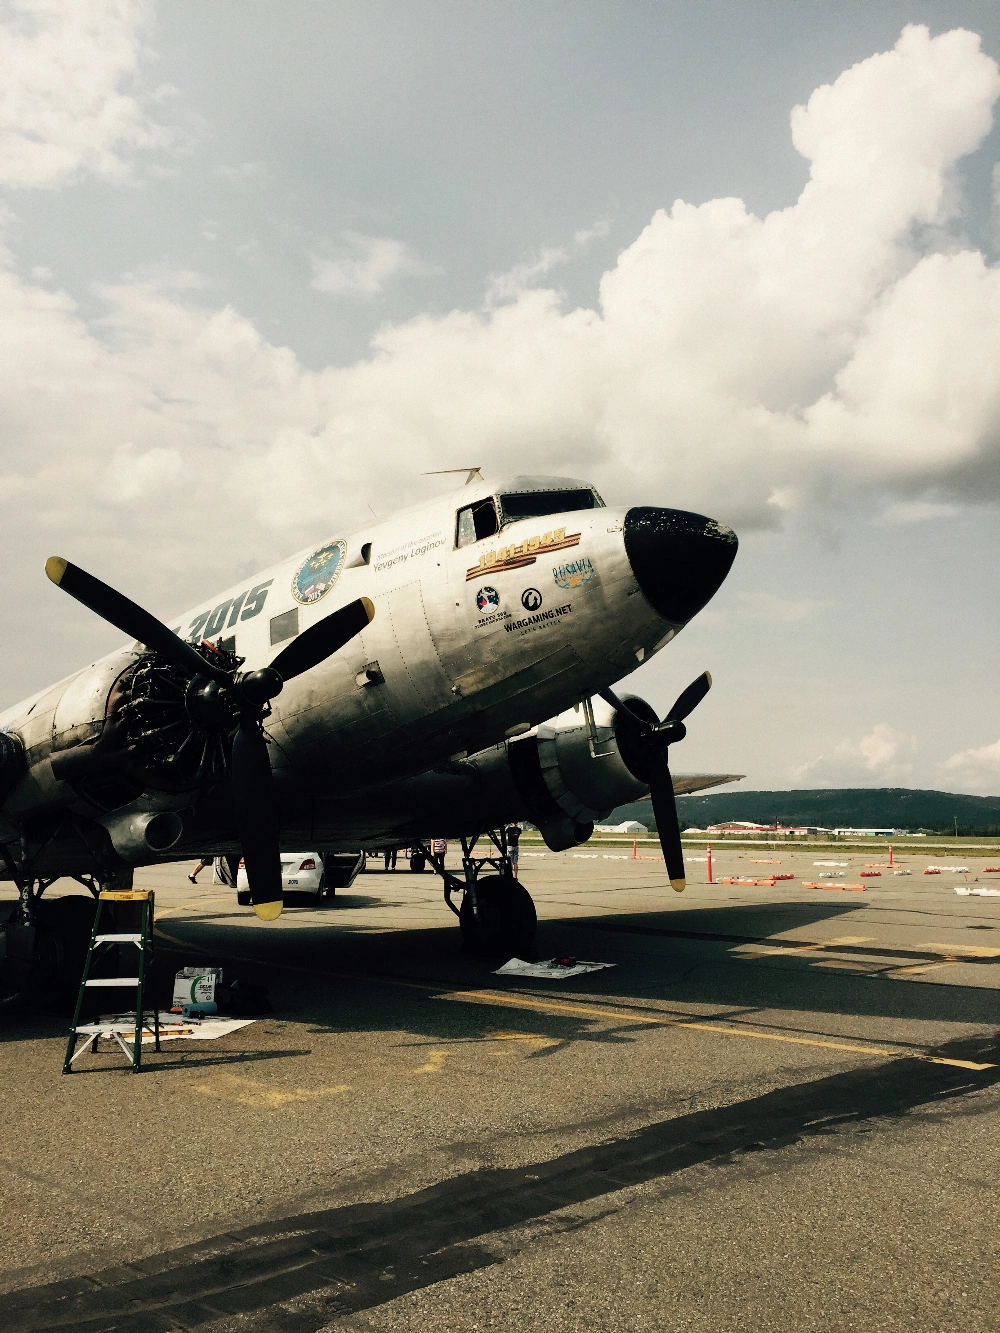 #C-47 #DC3 #WWII #alittlepieceofhistory